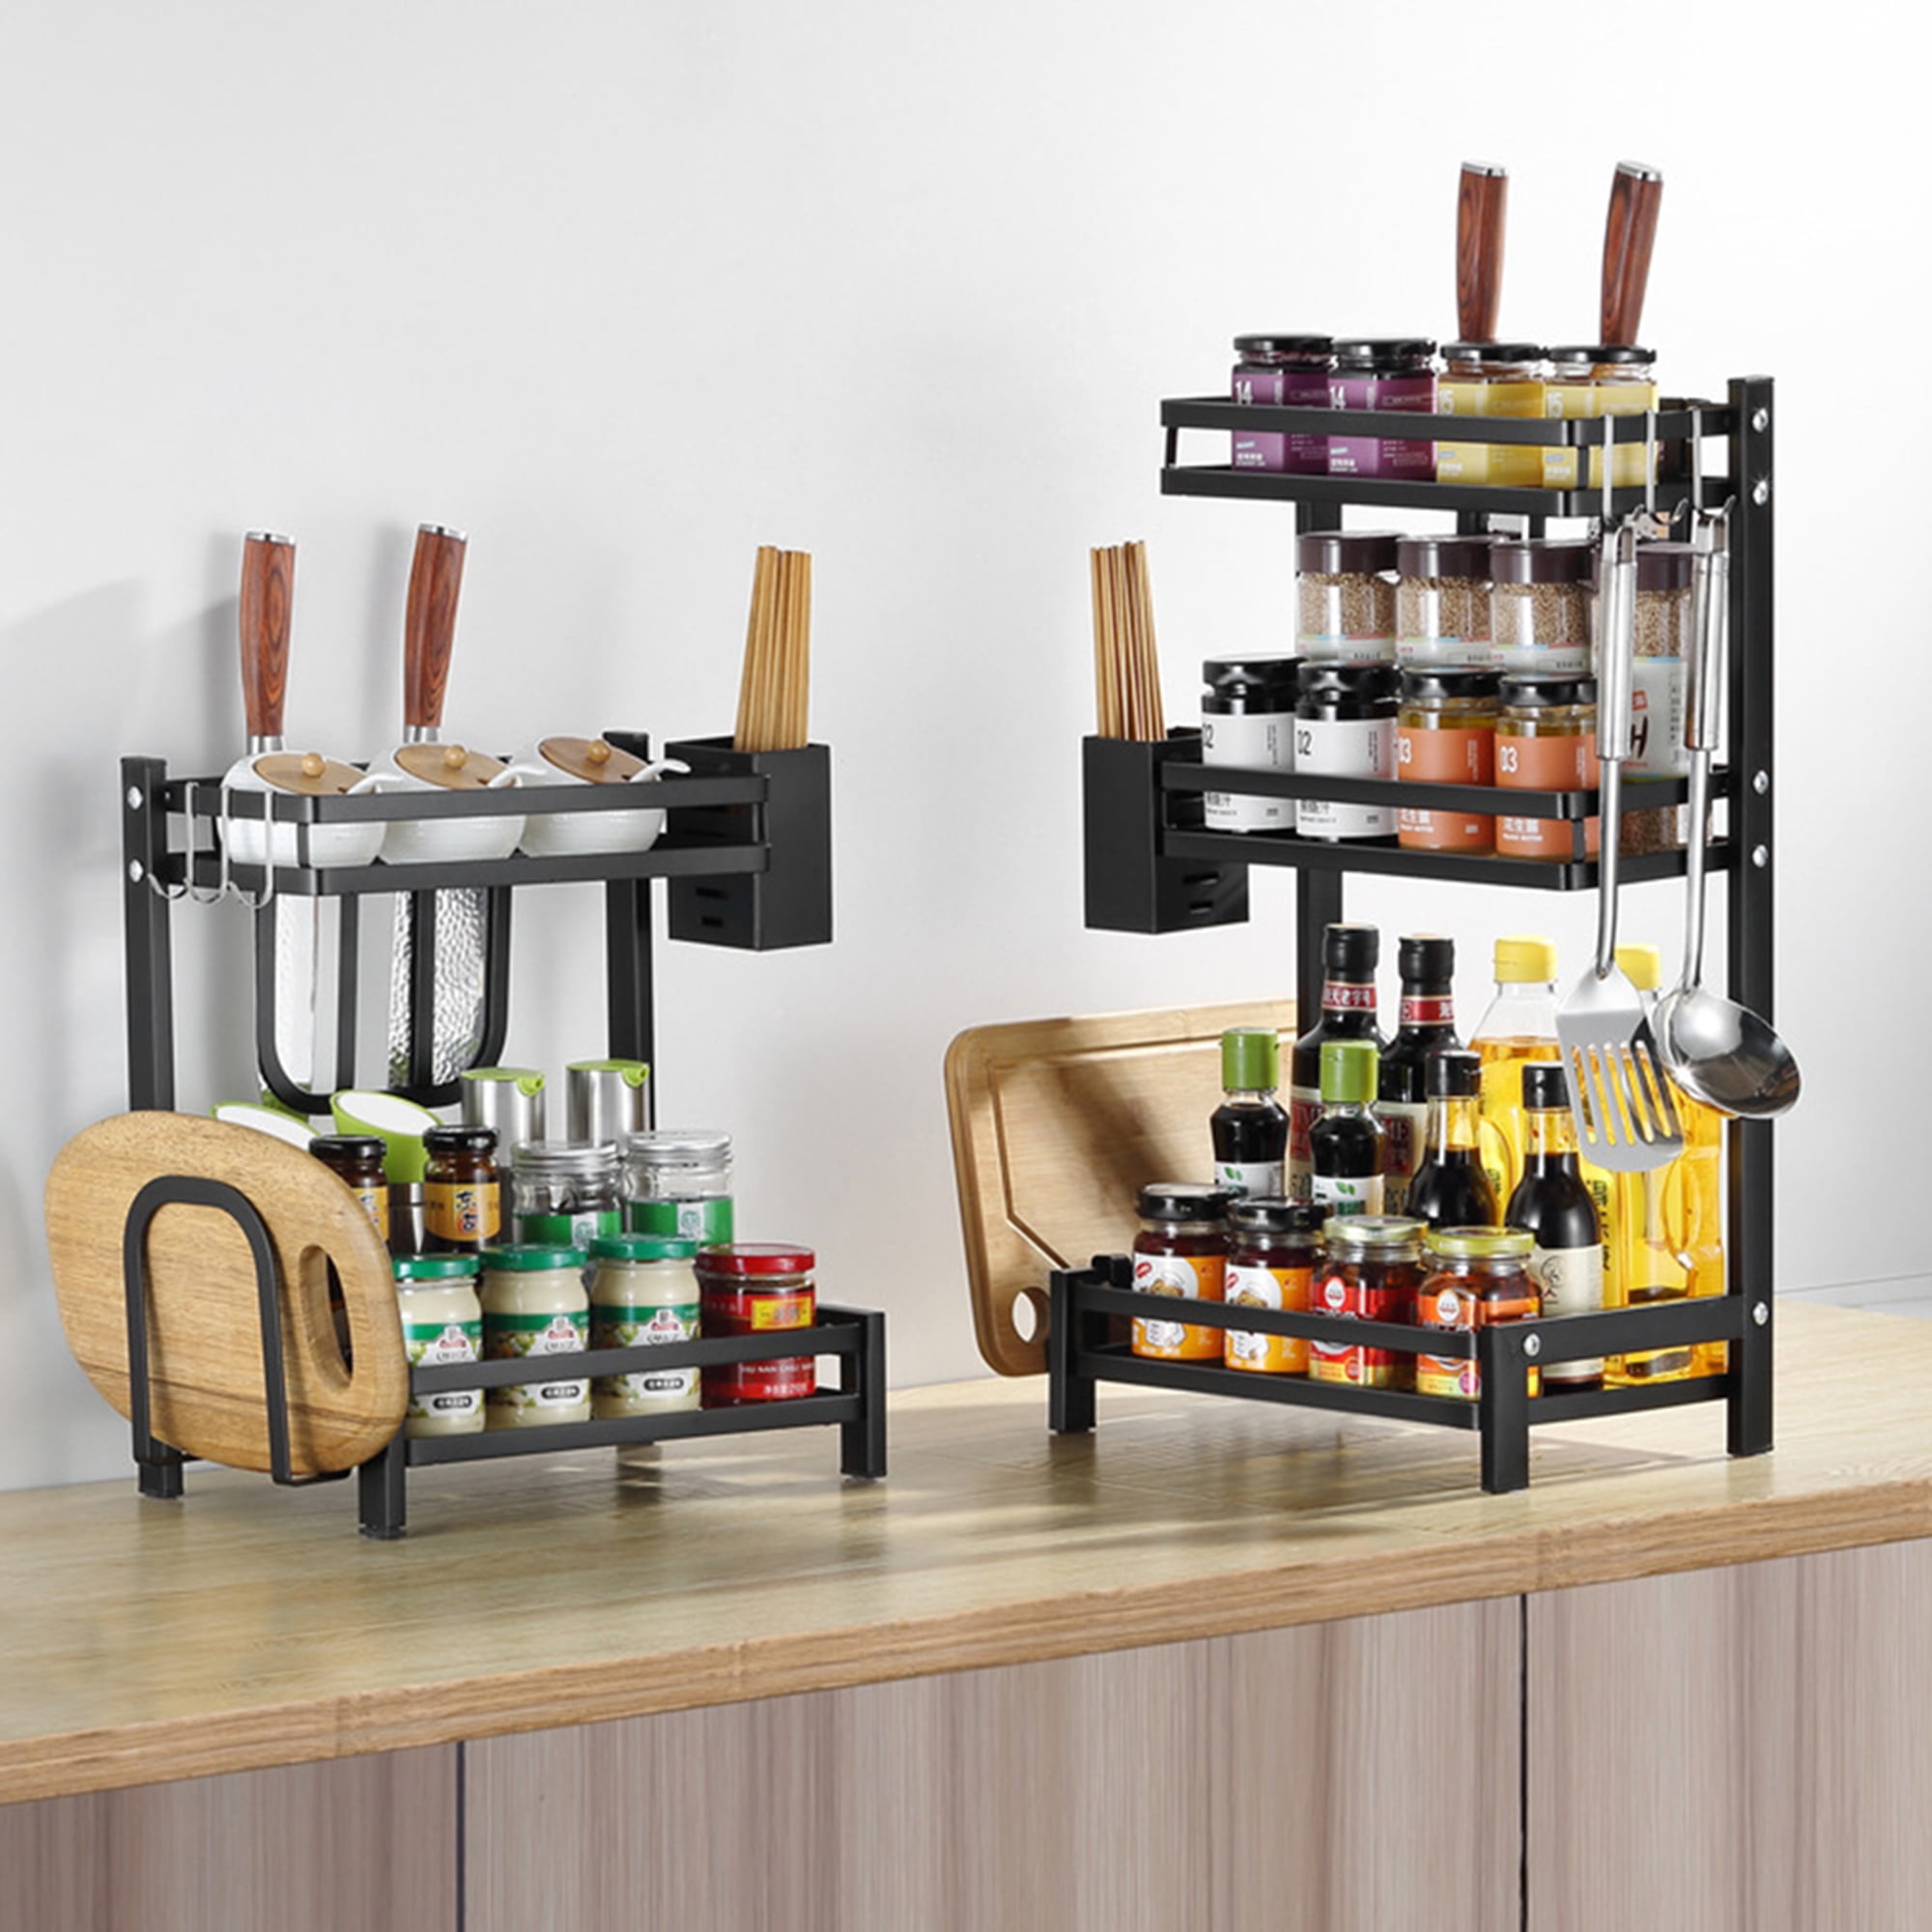 Dropship Two Retractable Frames - Expandable Cabinet Shelf Organizer, Stackable Pantry Shelf Organizer Adjustable Height Countertop Storage Shelf  Rack Cupboard Spice Rack For Cabinet Kitchen Bathroom Pantry to Sell Online  at a Lower